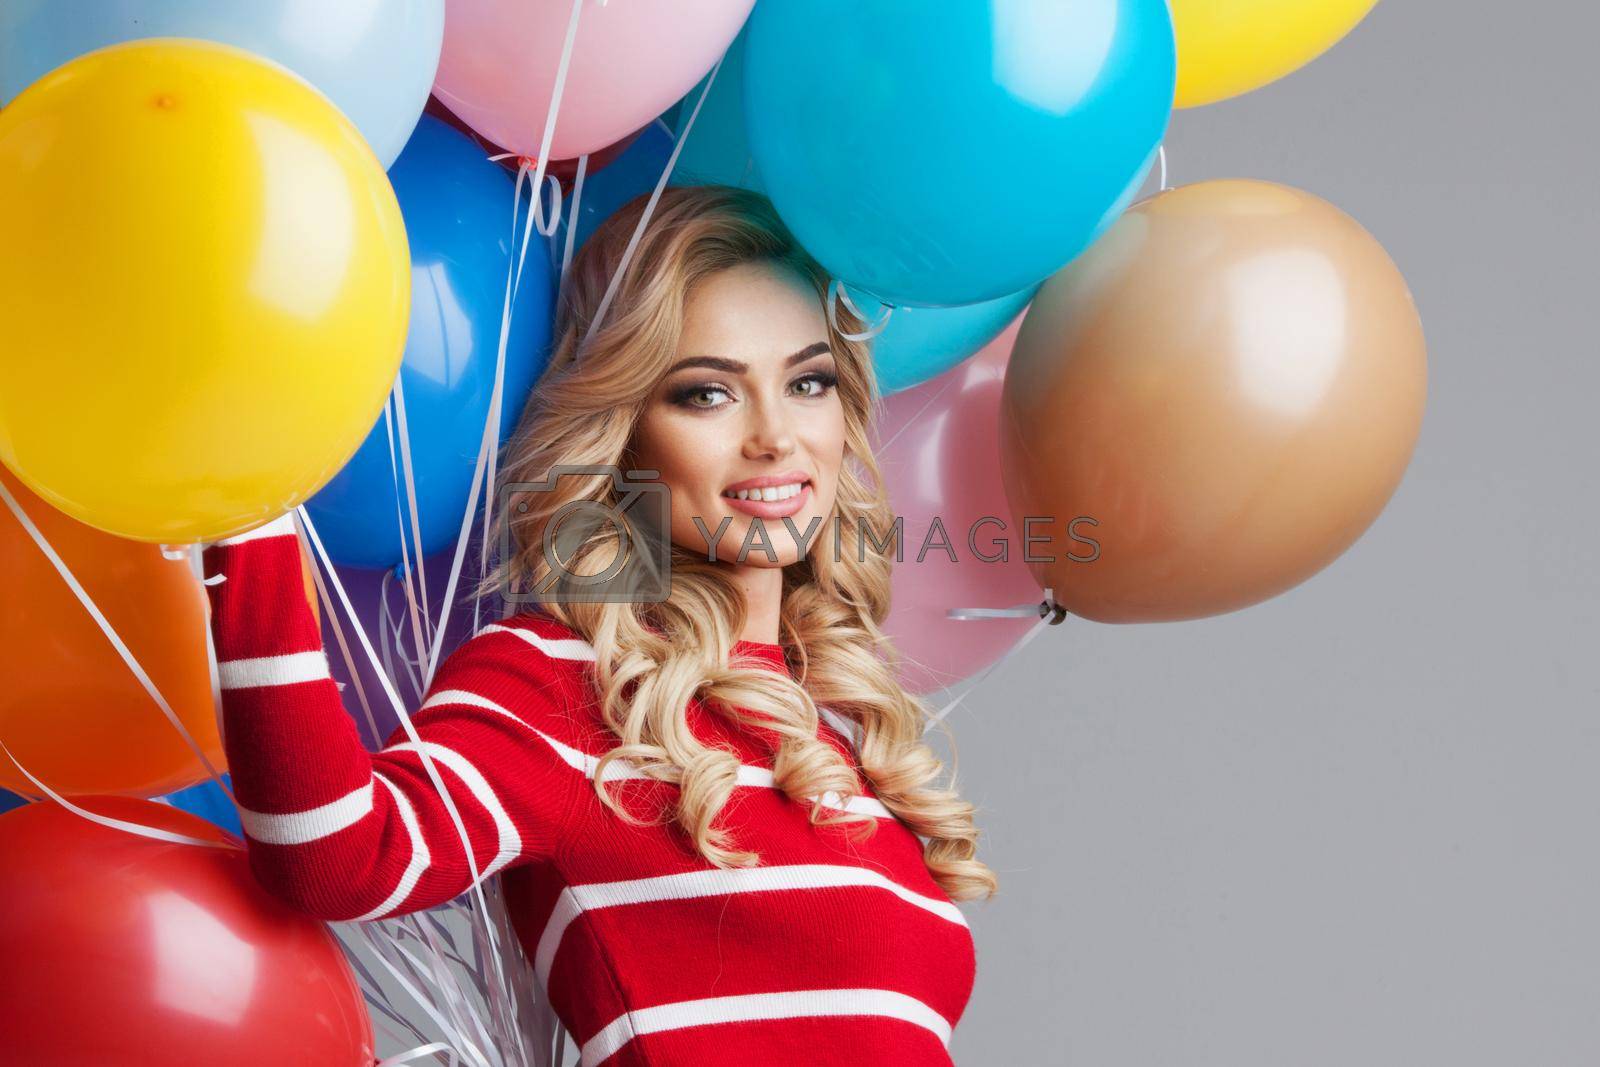 Royalty free image of Happy woman with many colorful balloons by Yellowj